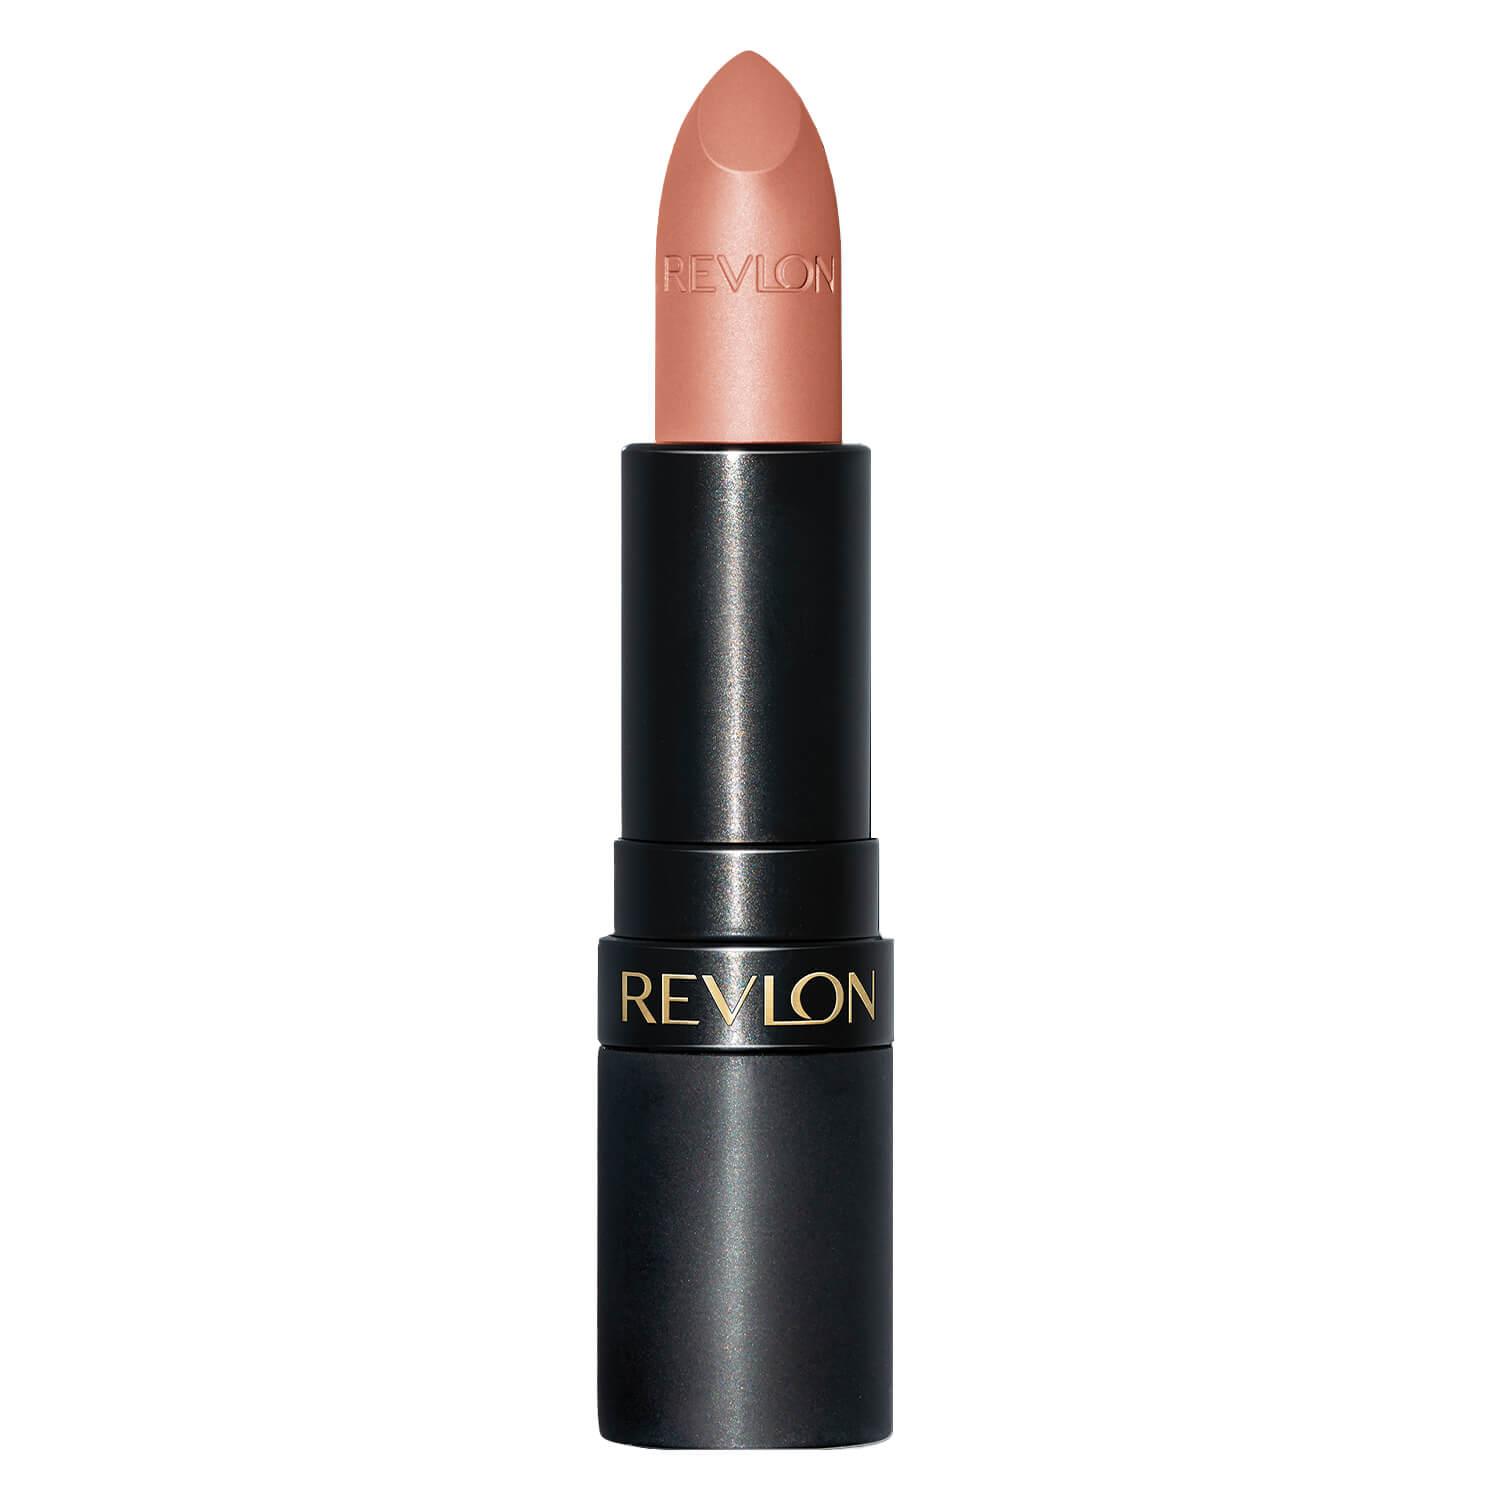 Super Lustrous Matte Lipstick If I Want To